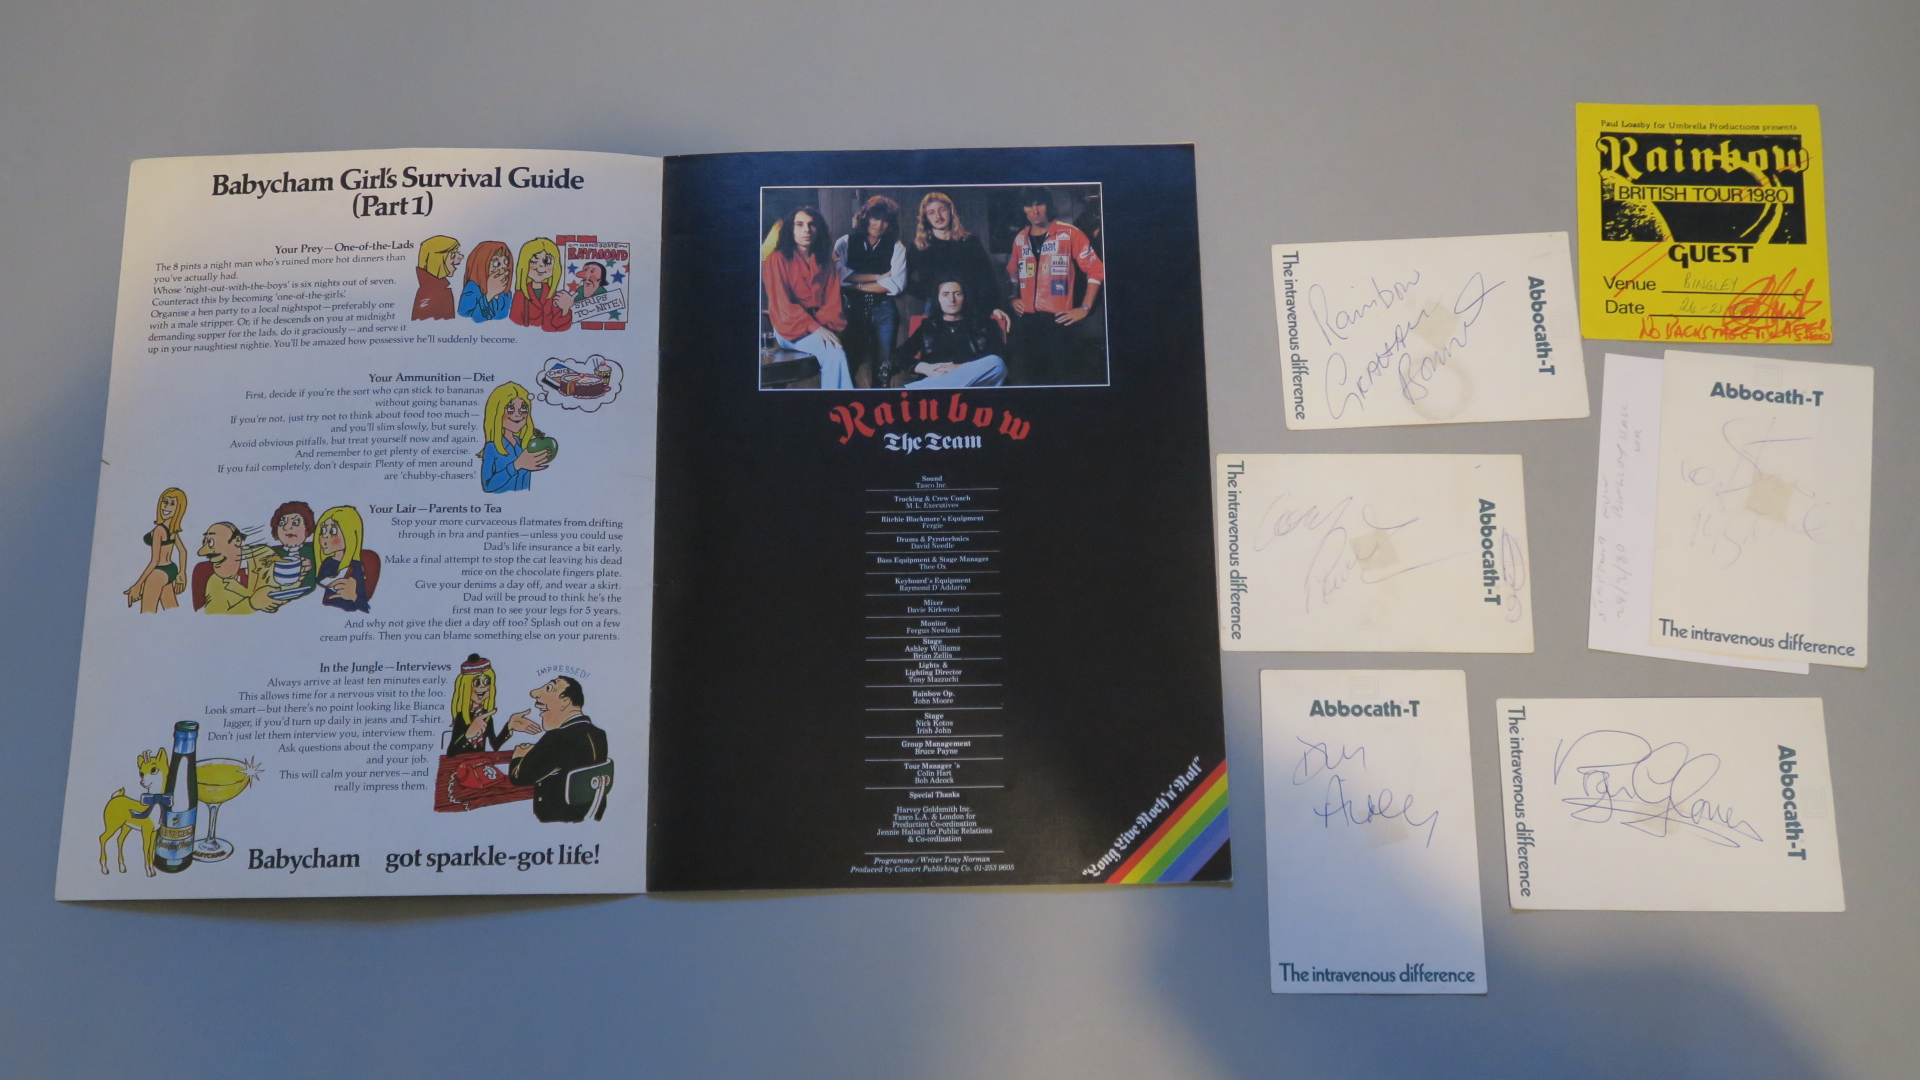 Three signed music programmes including Siouxsie and the Banshees signed to cover, - Image 6 of 8